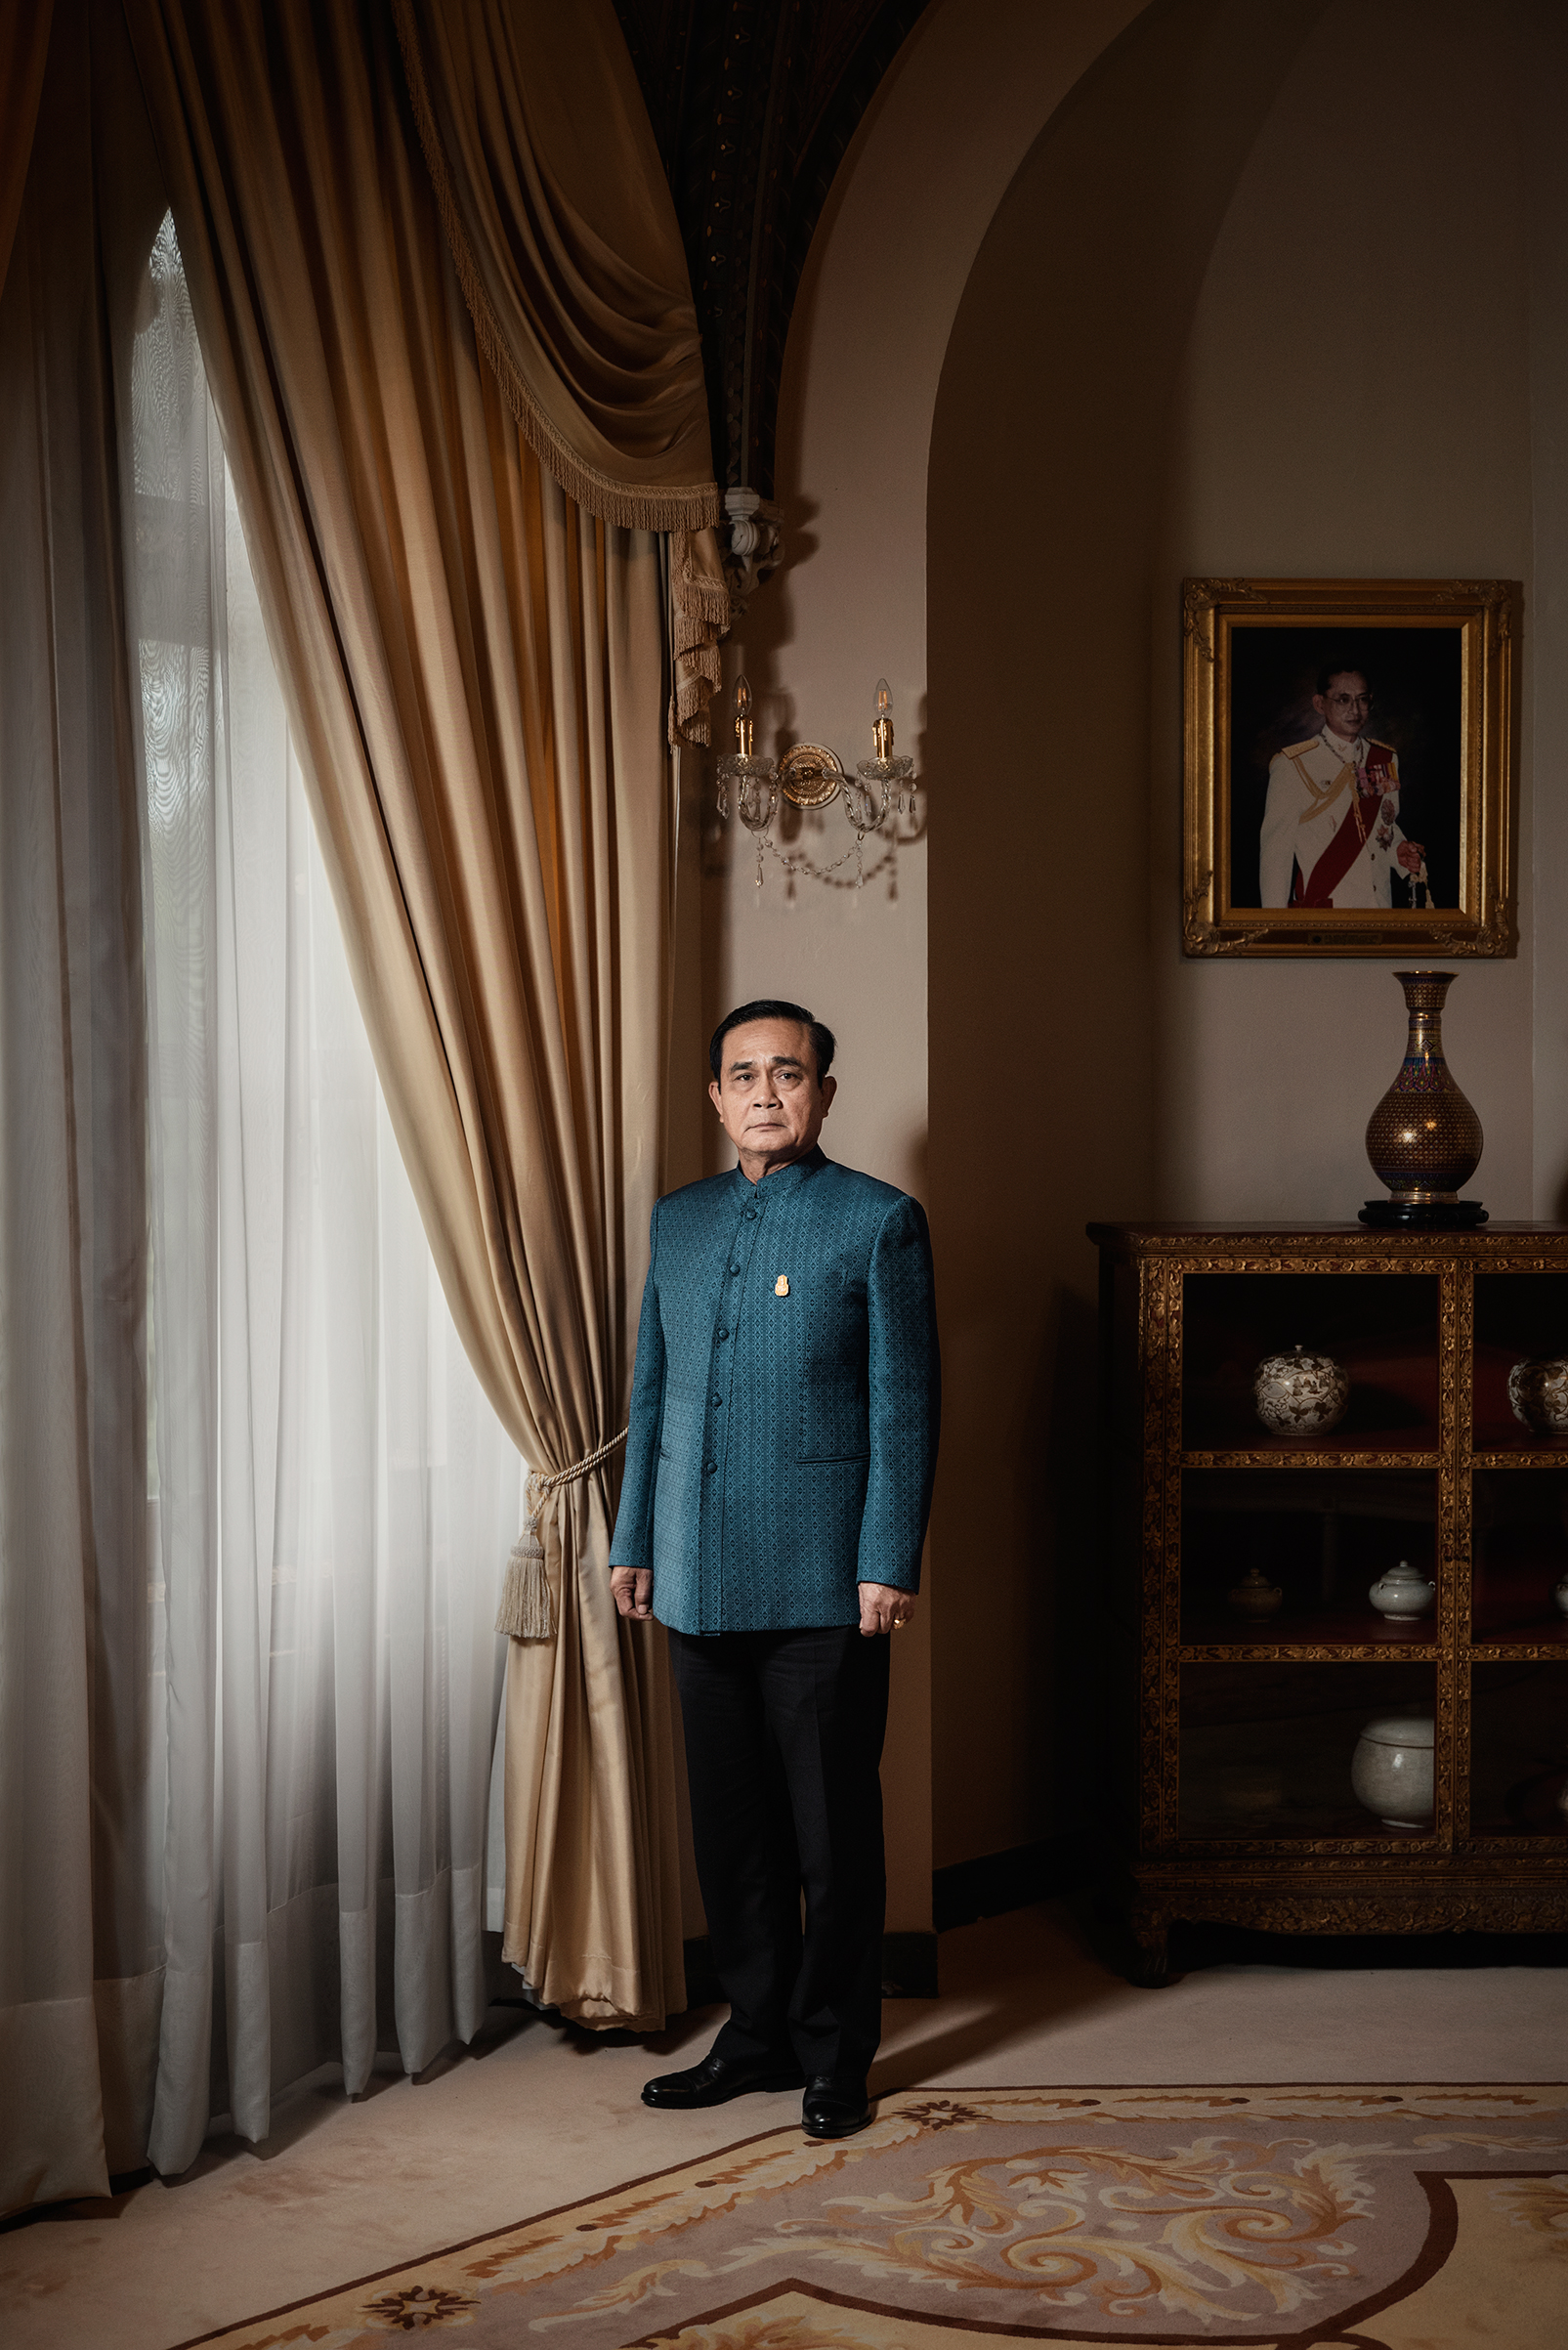 The Prime Minister of Thailand, Prayut Chan-o-cha, stands for a portrait at Government House in Bangkok, Thailand on Jun. 2, 2018. (Adam Ferguson for Time)